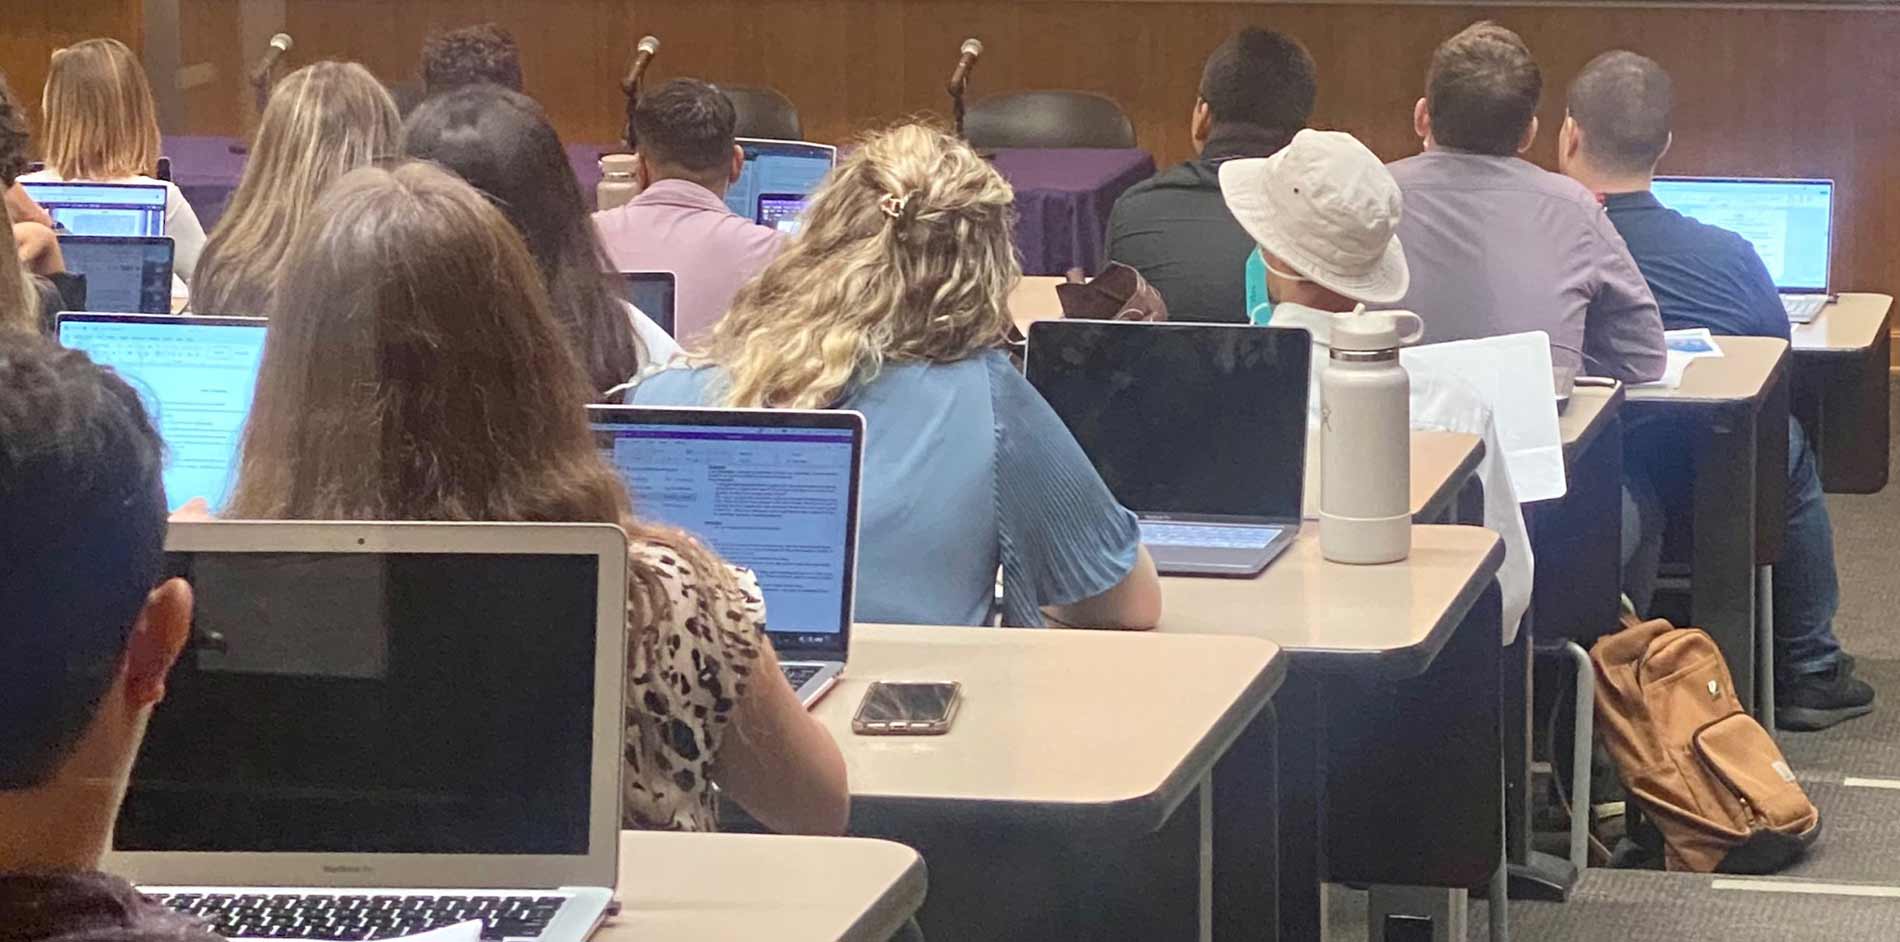 students on laptops during a lecture at California Western School of Law